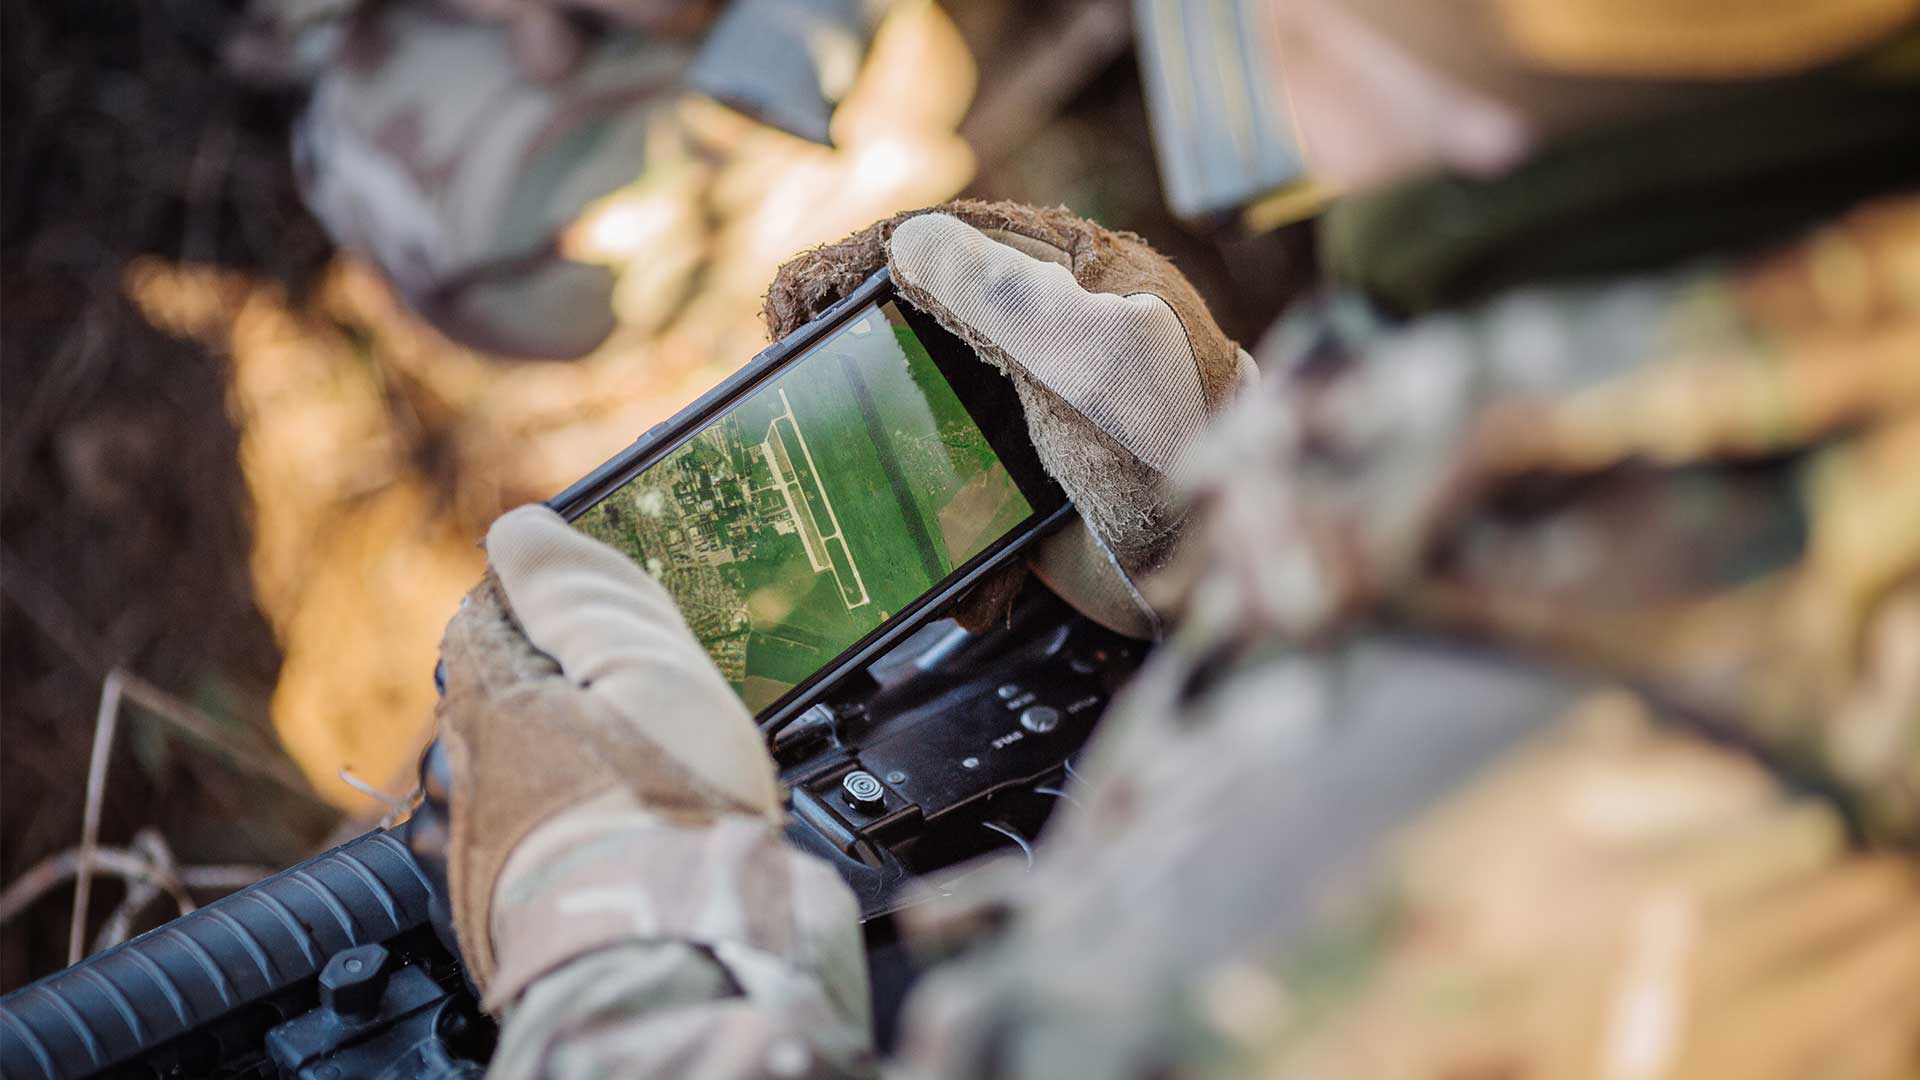 Military teams operating at the tactical edge require precise data relevant to the operation delivered securely in close to real-time – and integrated response coordinated across land, air and sea. Together, ManTech’s ST3P delivers mission results safely and effectively.